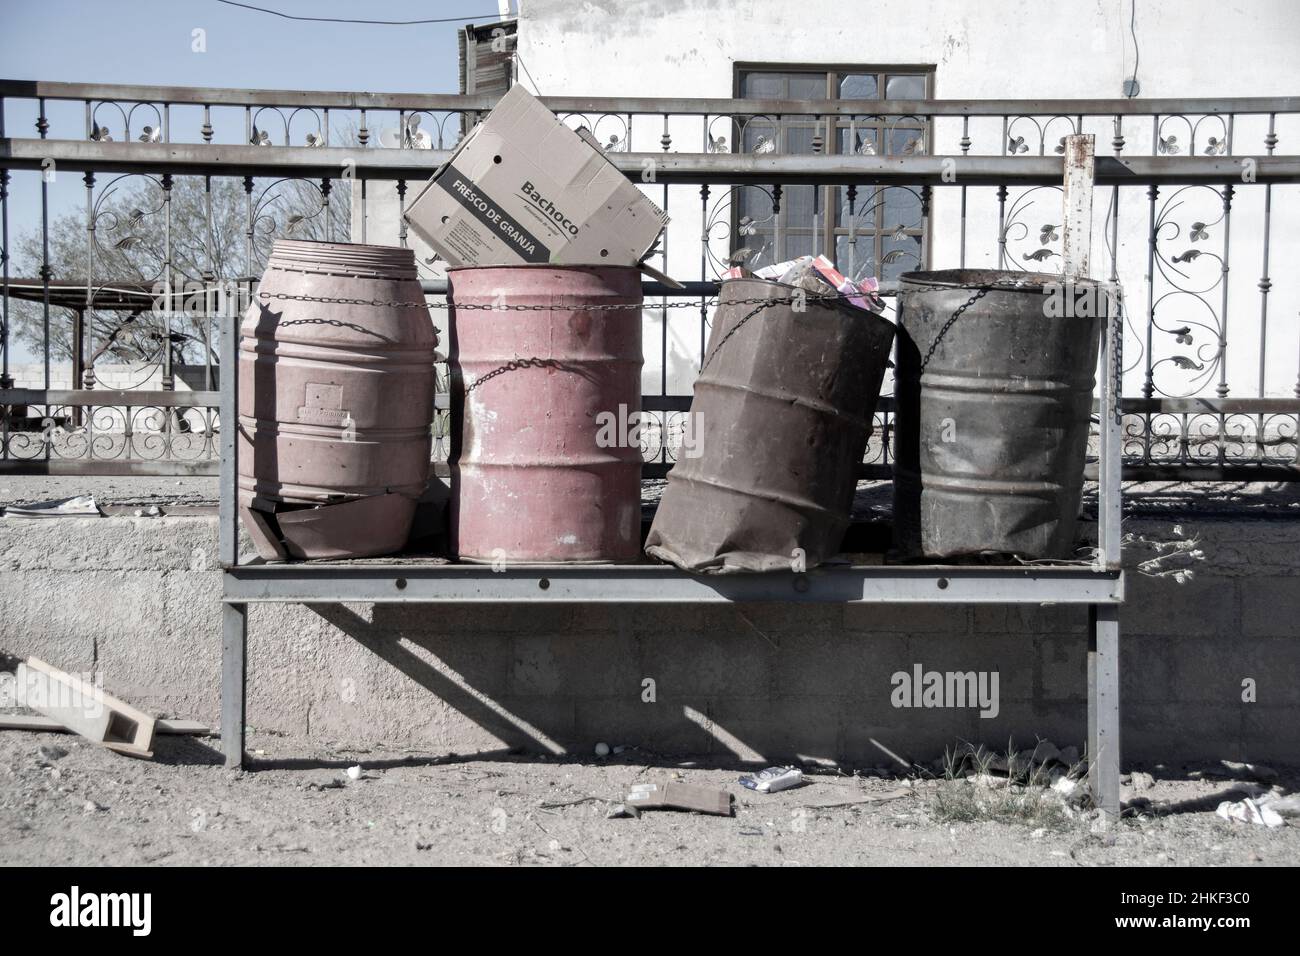 A group of four metal trash cans. Filled with garbage. Puerto Penasco, Mexico, Stock Photo